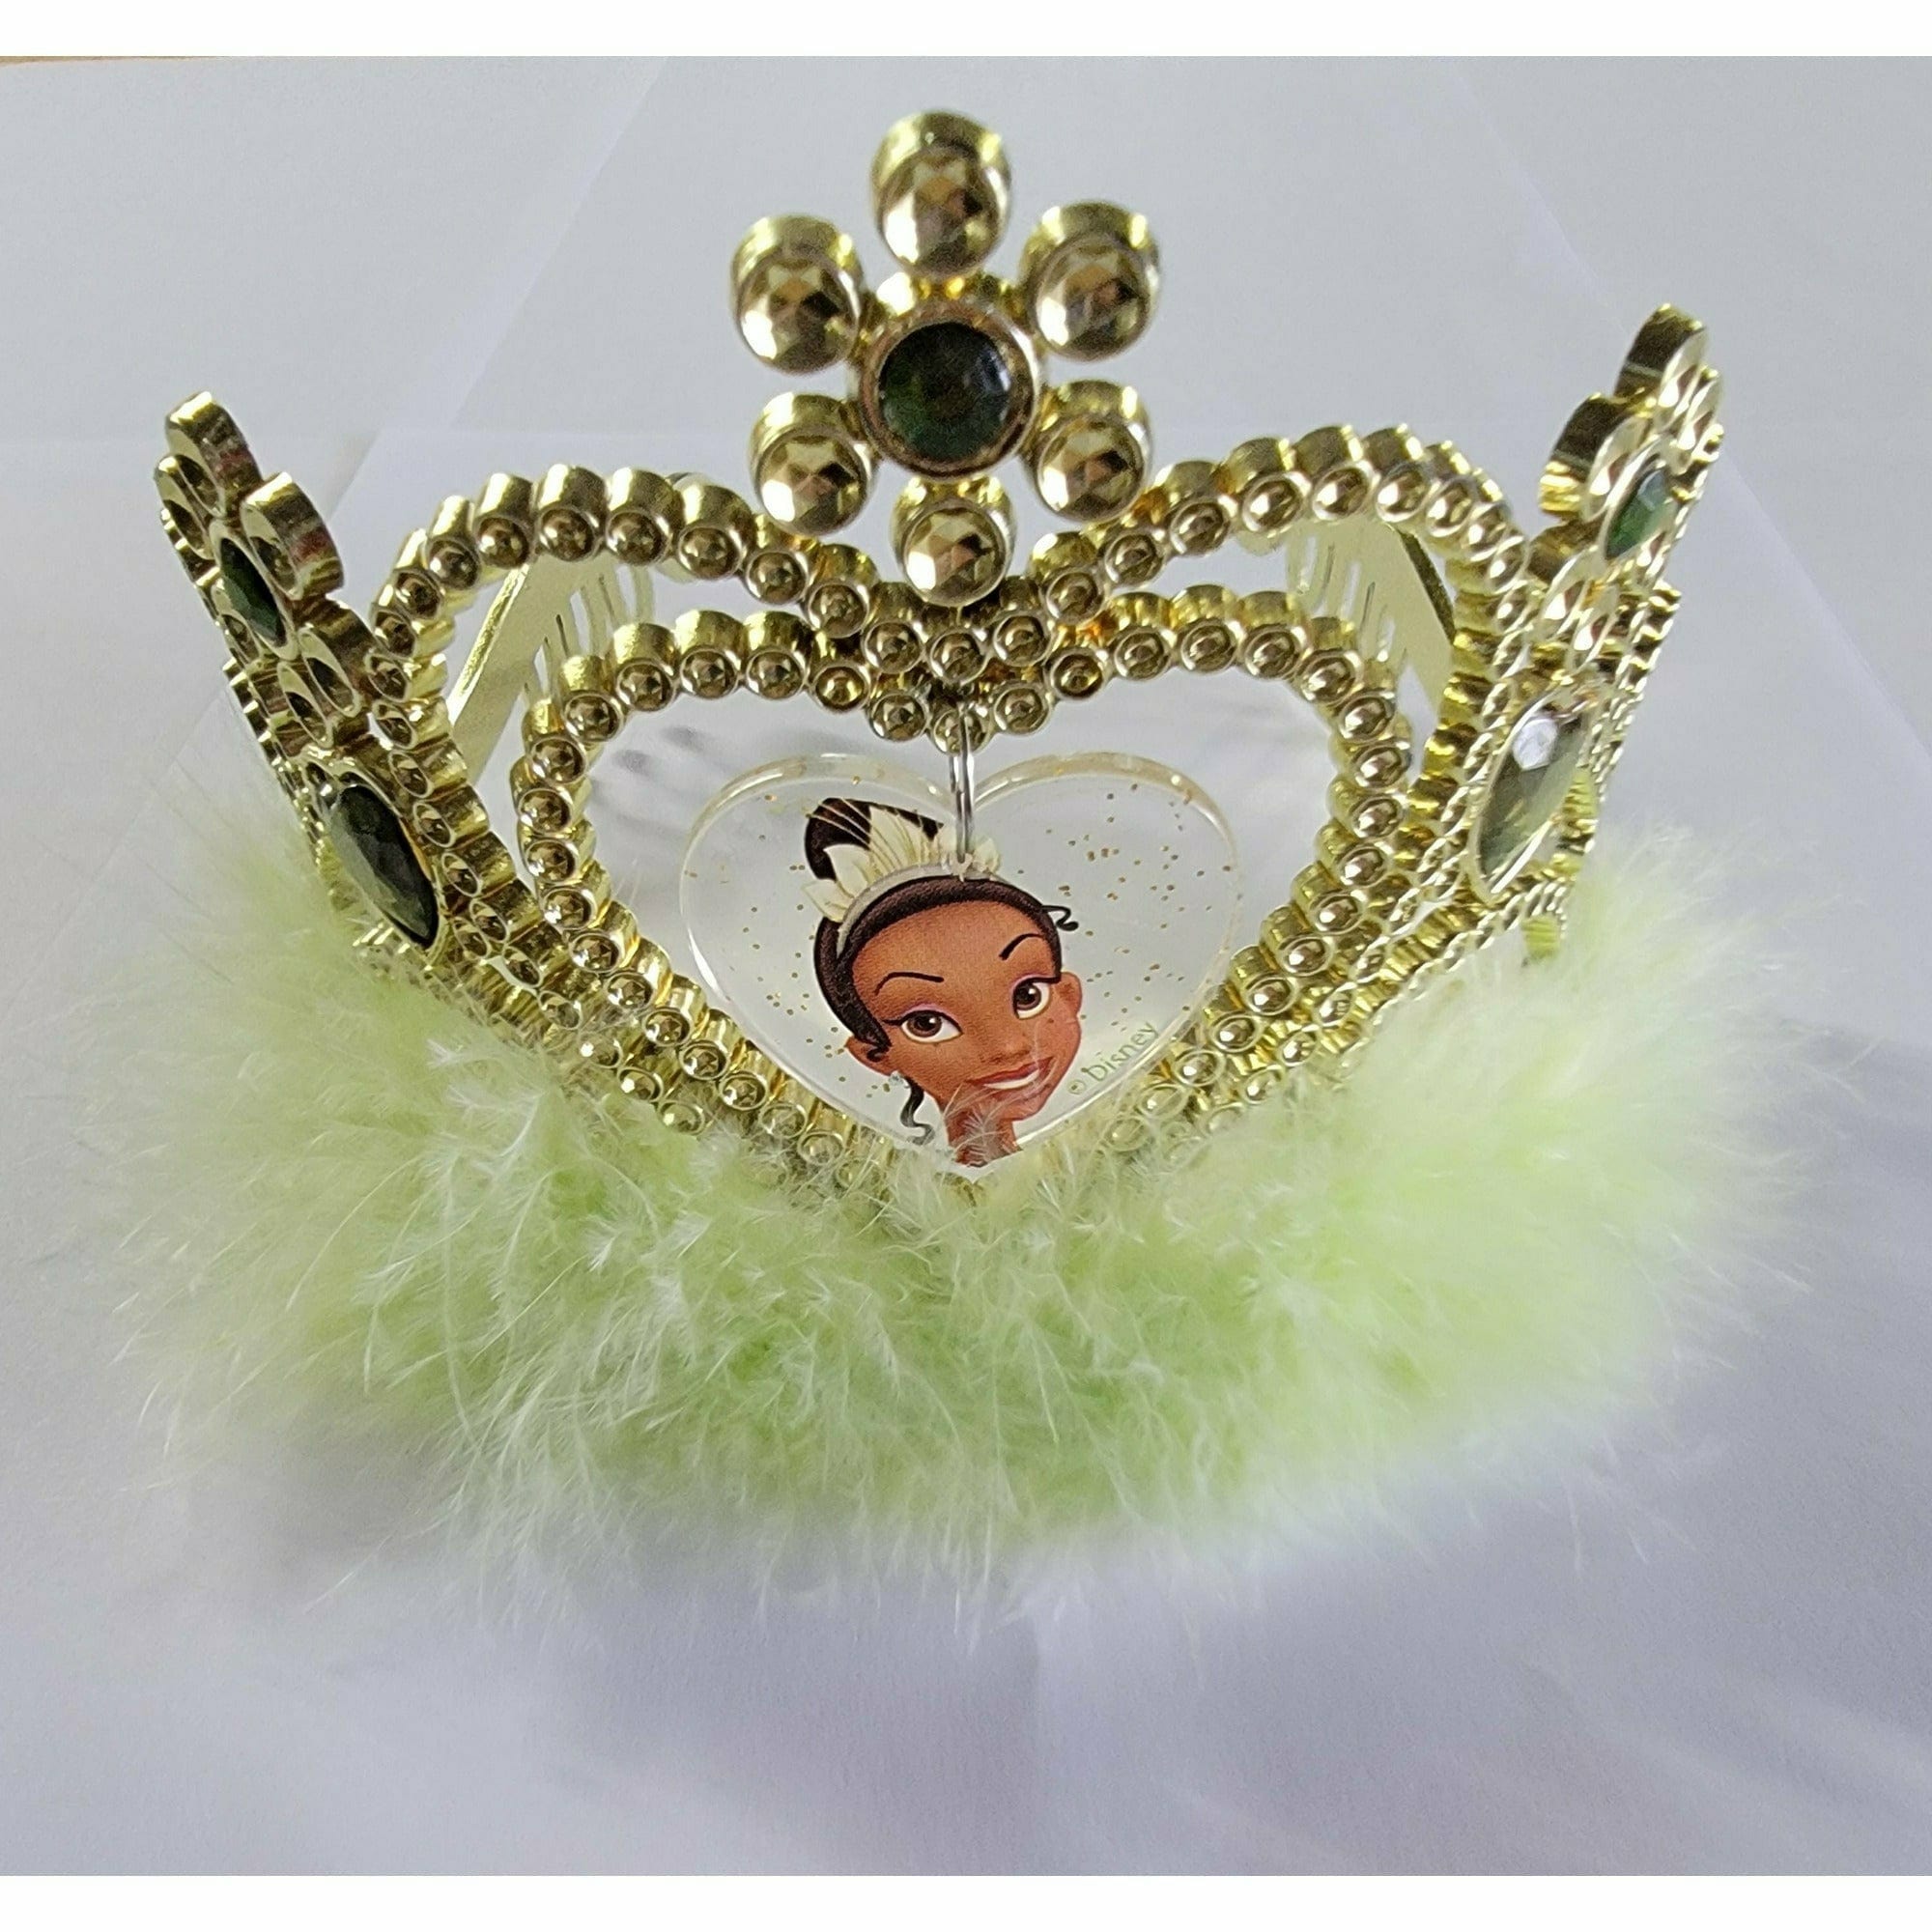 COSTUMES USA COSTUMES: ACCESSORIES Tiana Tiara for Kids